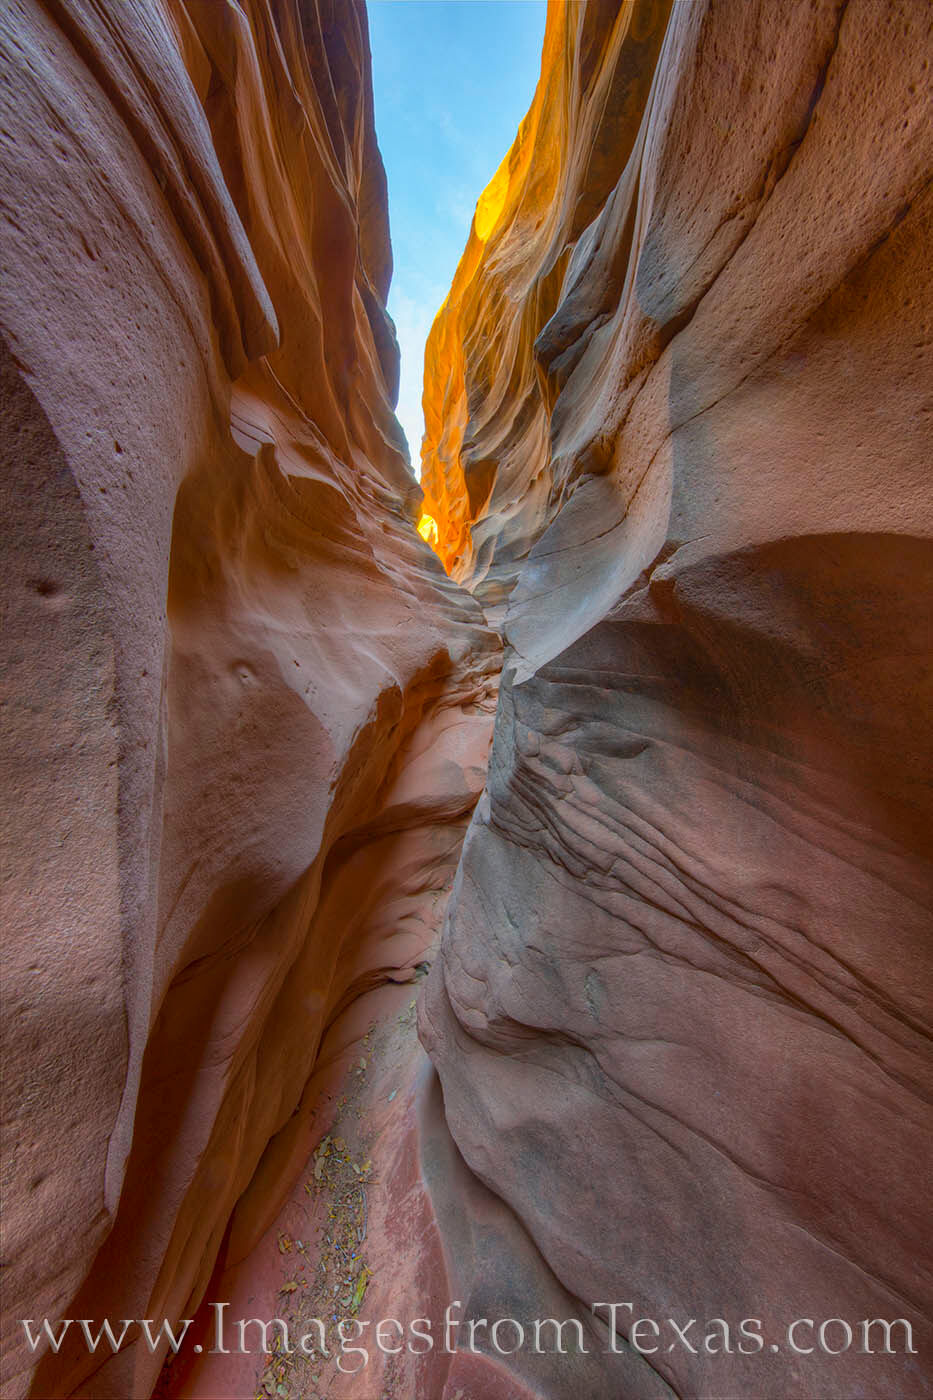 Lines and curves and colors make up part of the allure of the Upper Slot Canyon in Palo Duro's Central Utah Slot Canyon formations...